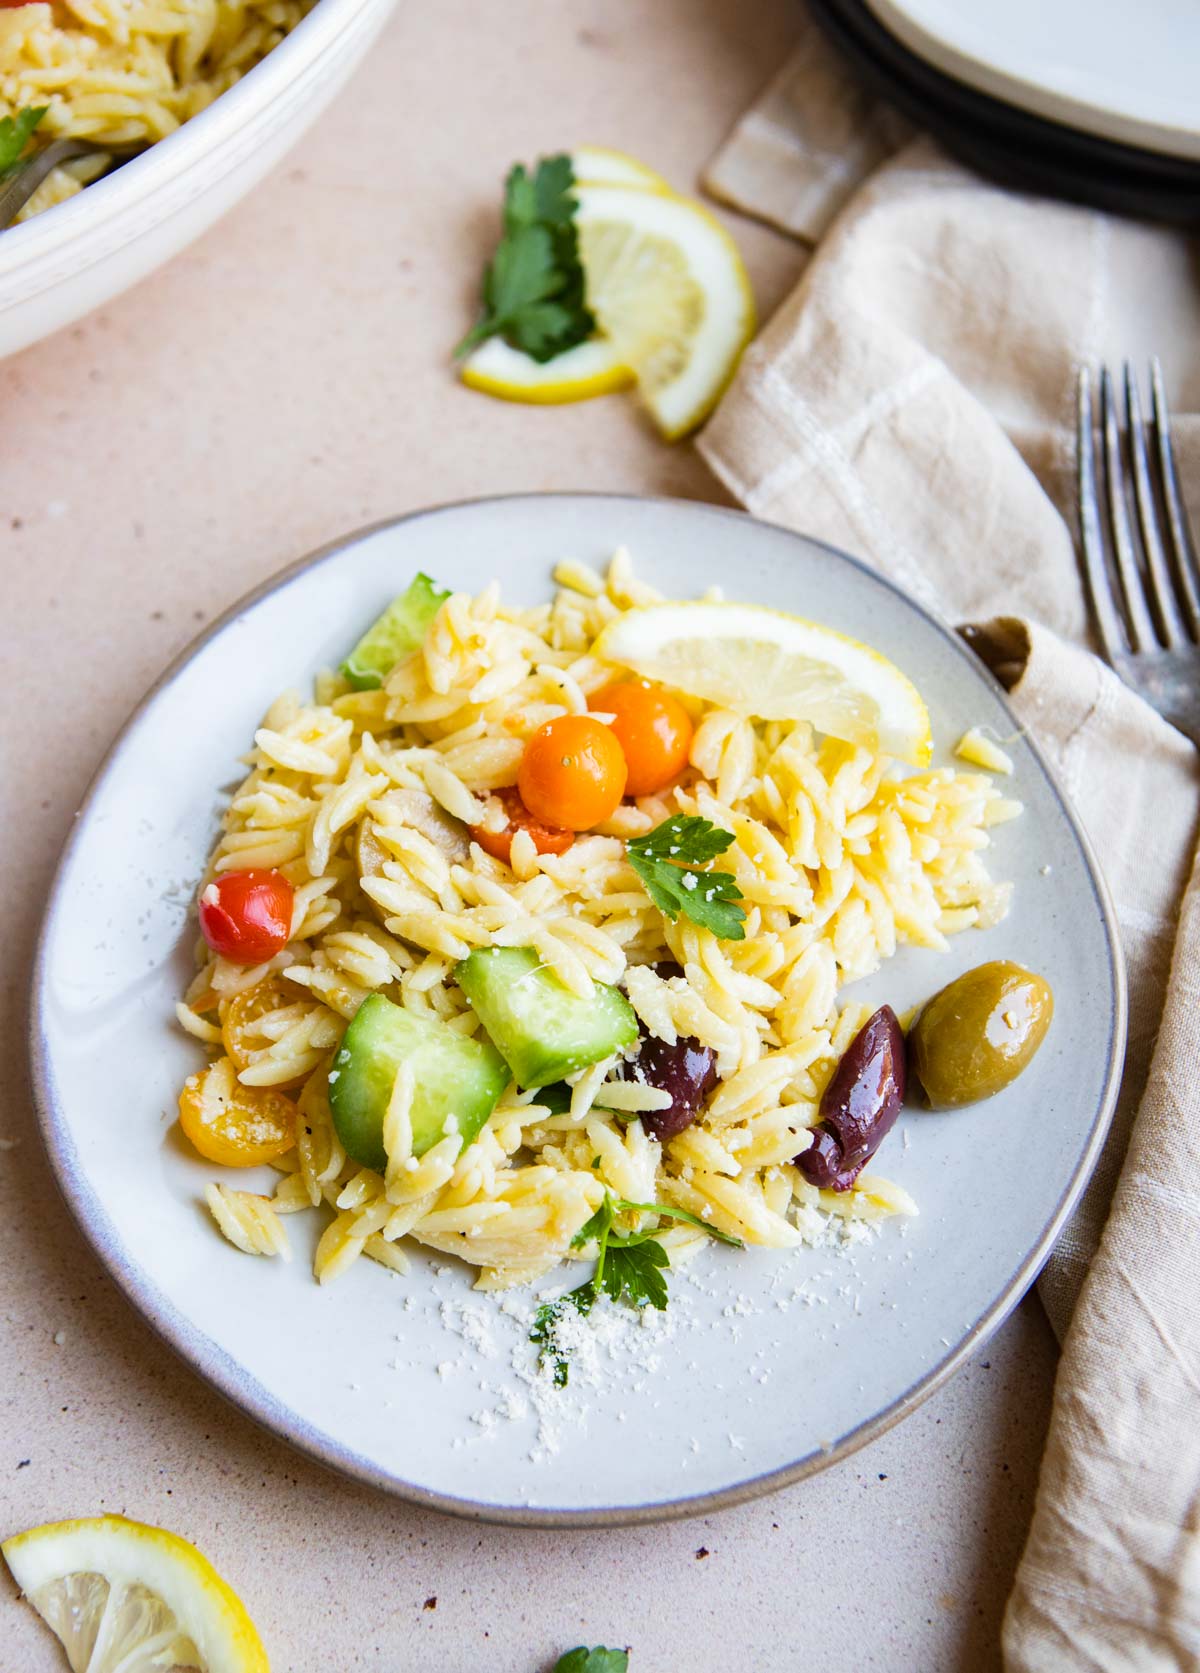 A serving of lemon orzo salad on a plate, ready to enjoy with parmesan shared over the top.